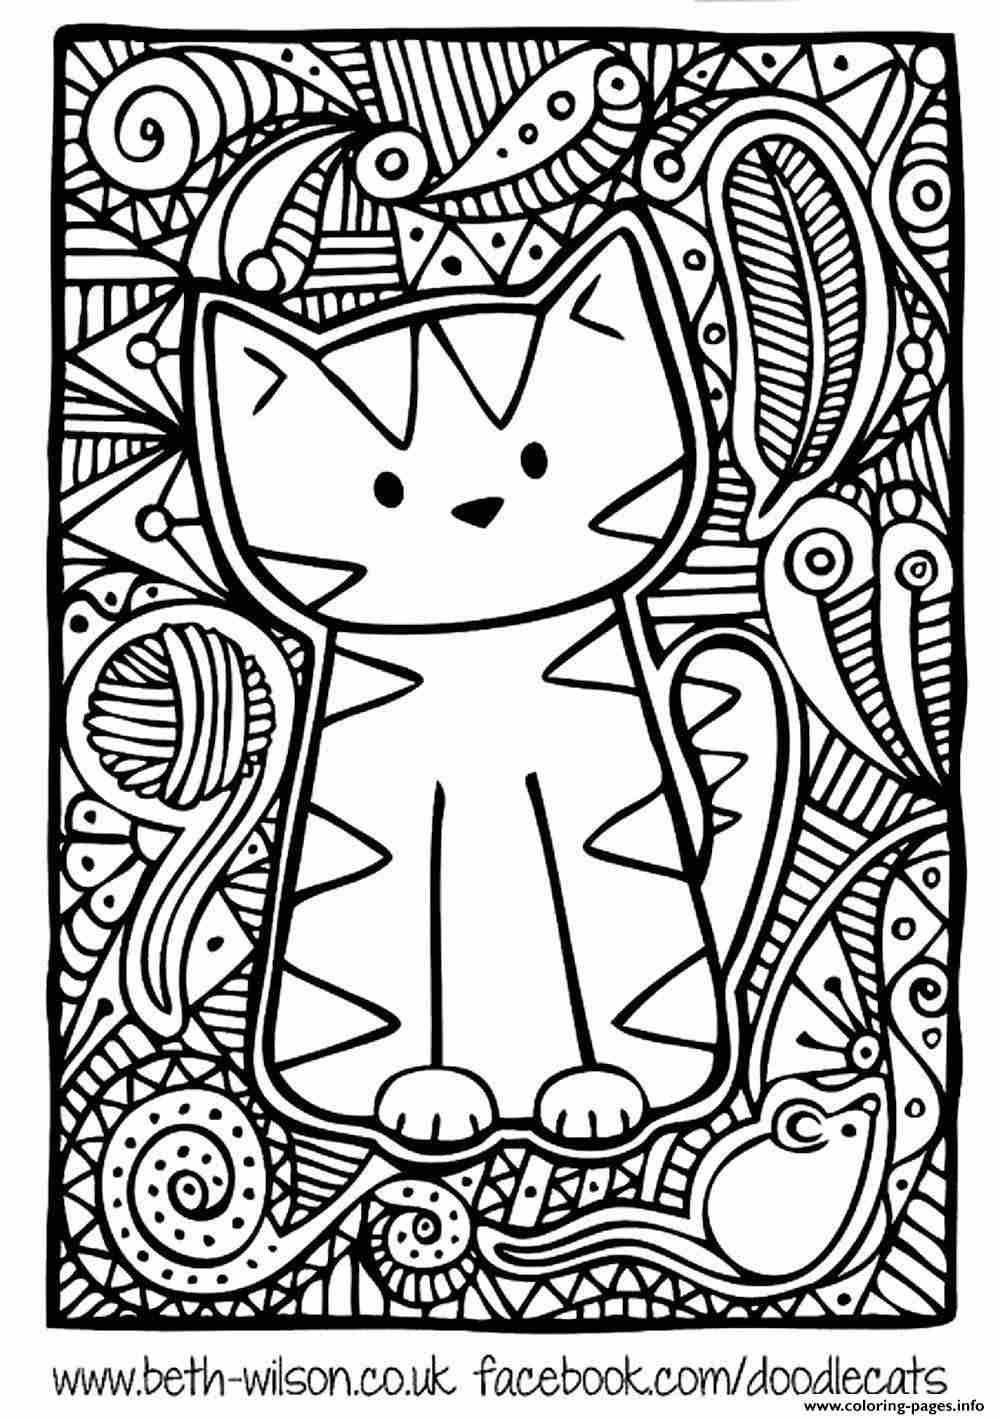 animal-mandala-coloring-pages-pdf-feel-free-to-print-and-color-from